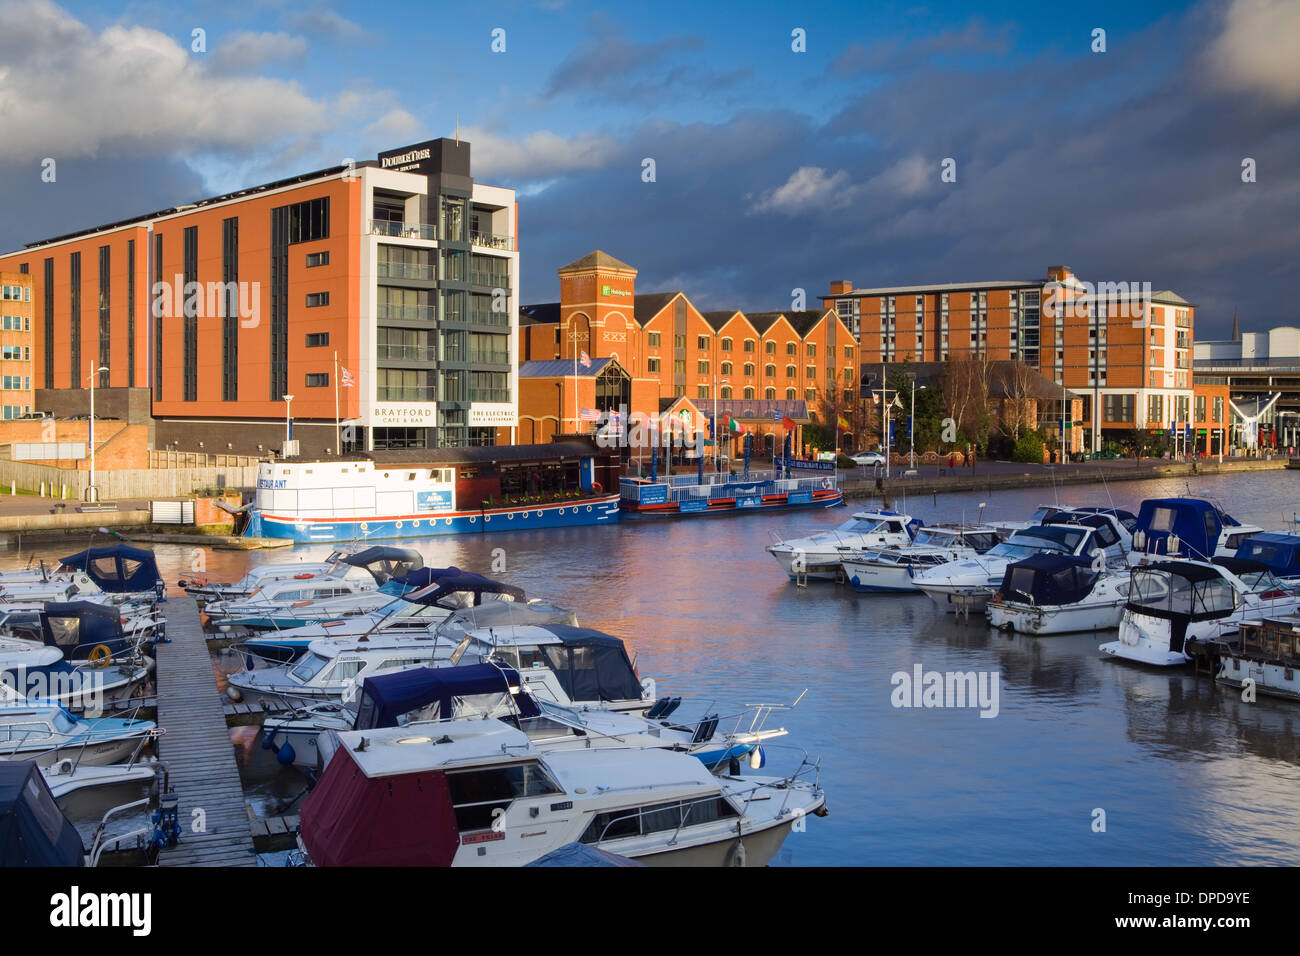 The Marina at Brayford Pool in Lincoln, Lincolnshire, late in the afternoon Stock Photo